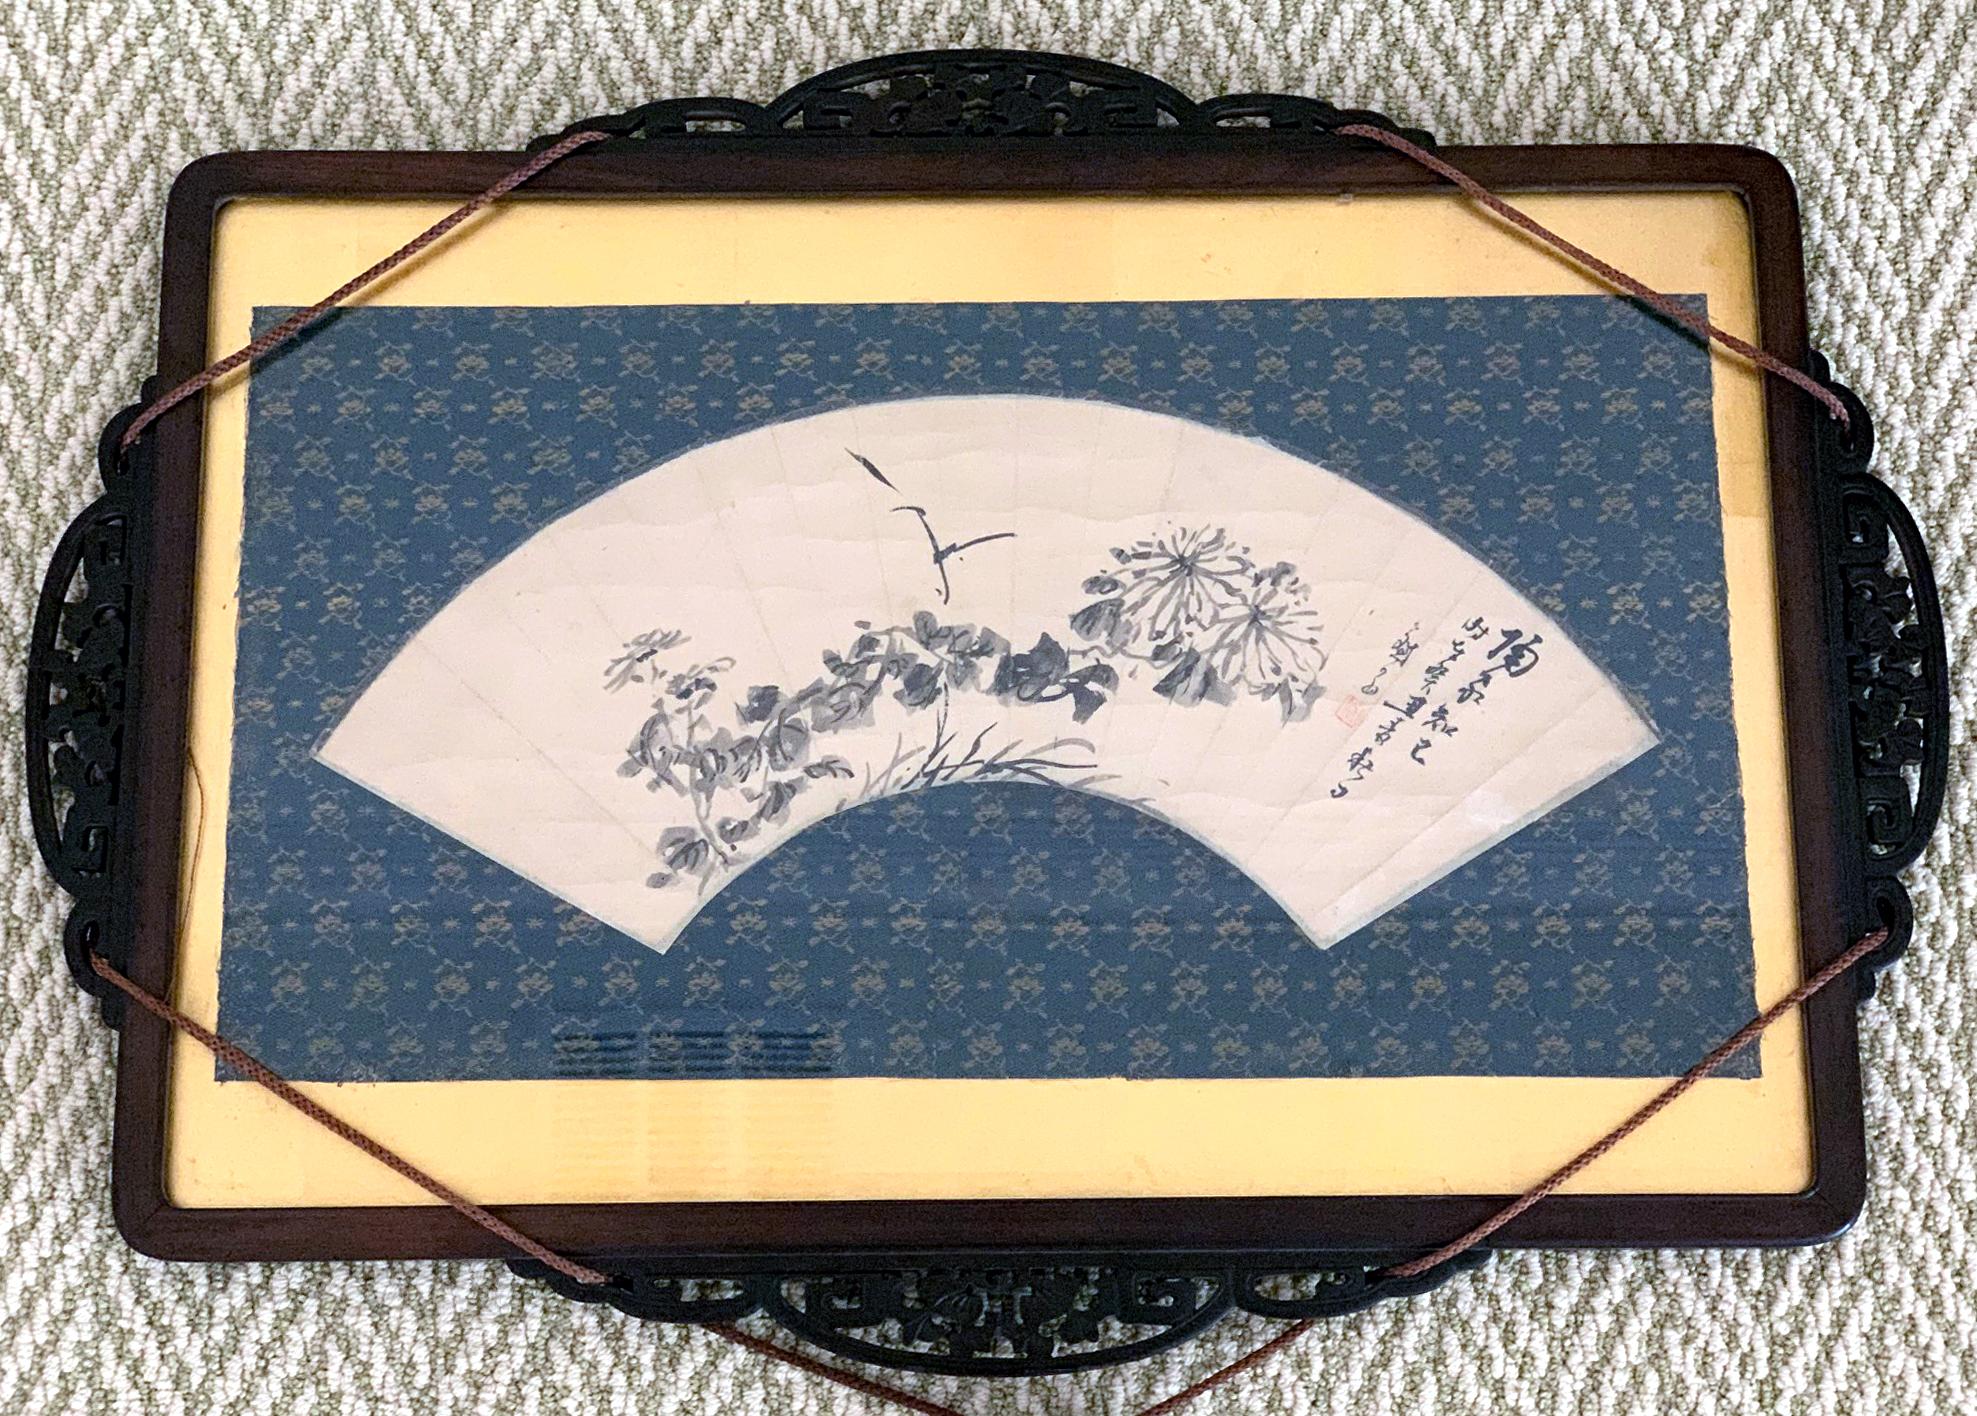 An ink painting on the fan surface by Japanese Zen artist Hidaka Tetsuo (1791-1871), now framed in a traditional Japanese carved wood frame with silk fabric mat and decorative hanging tassels. The painting depicts a floral group consisting of autumn